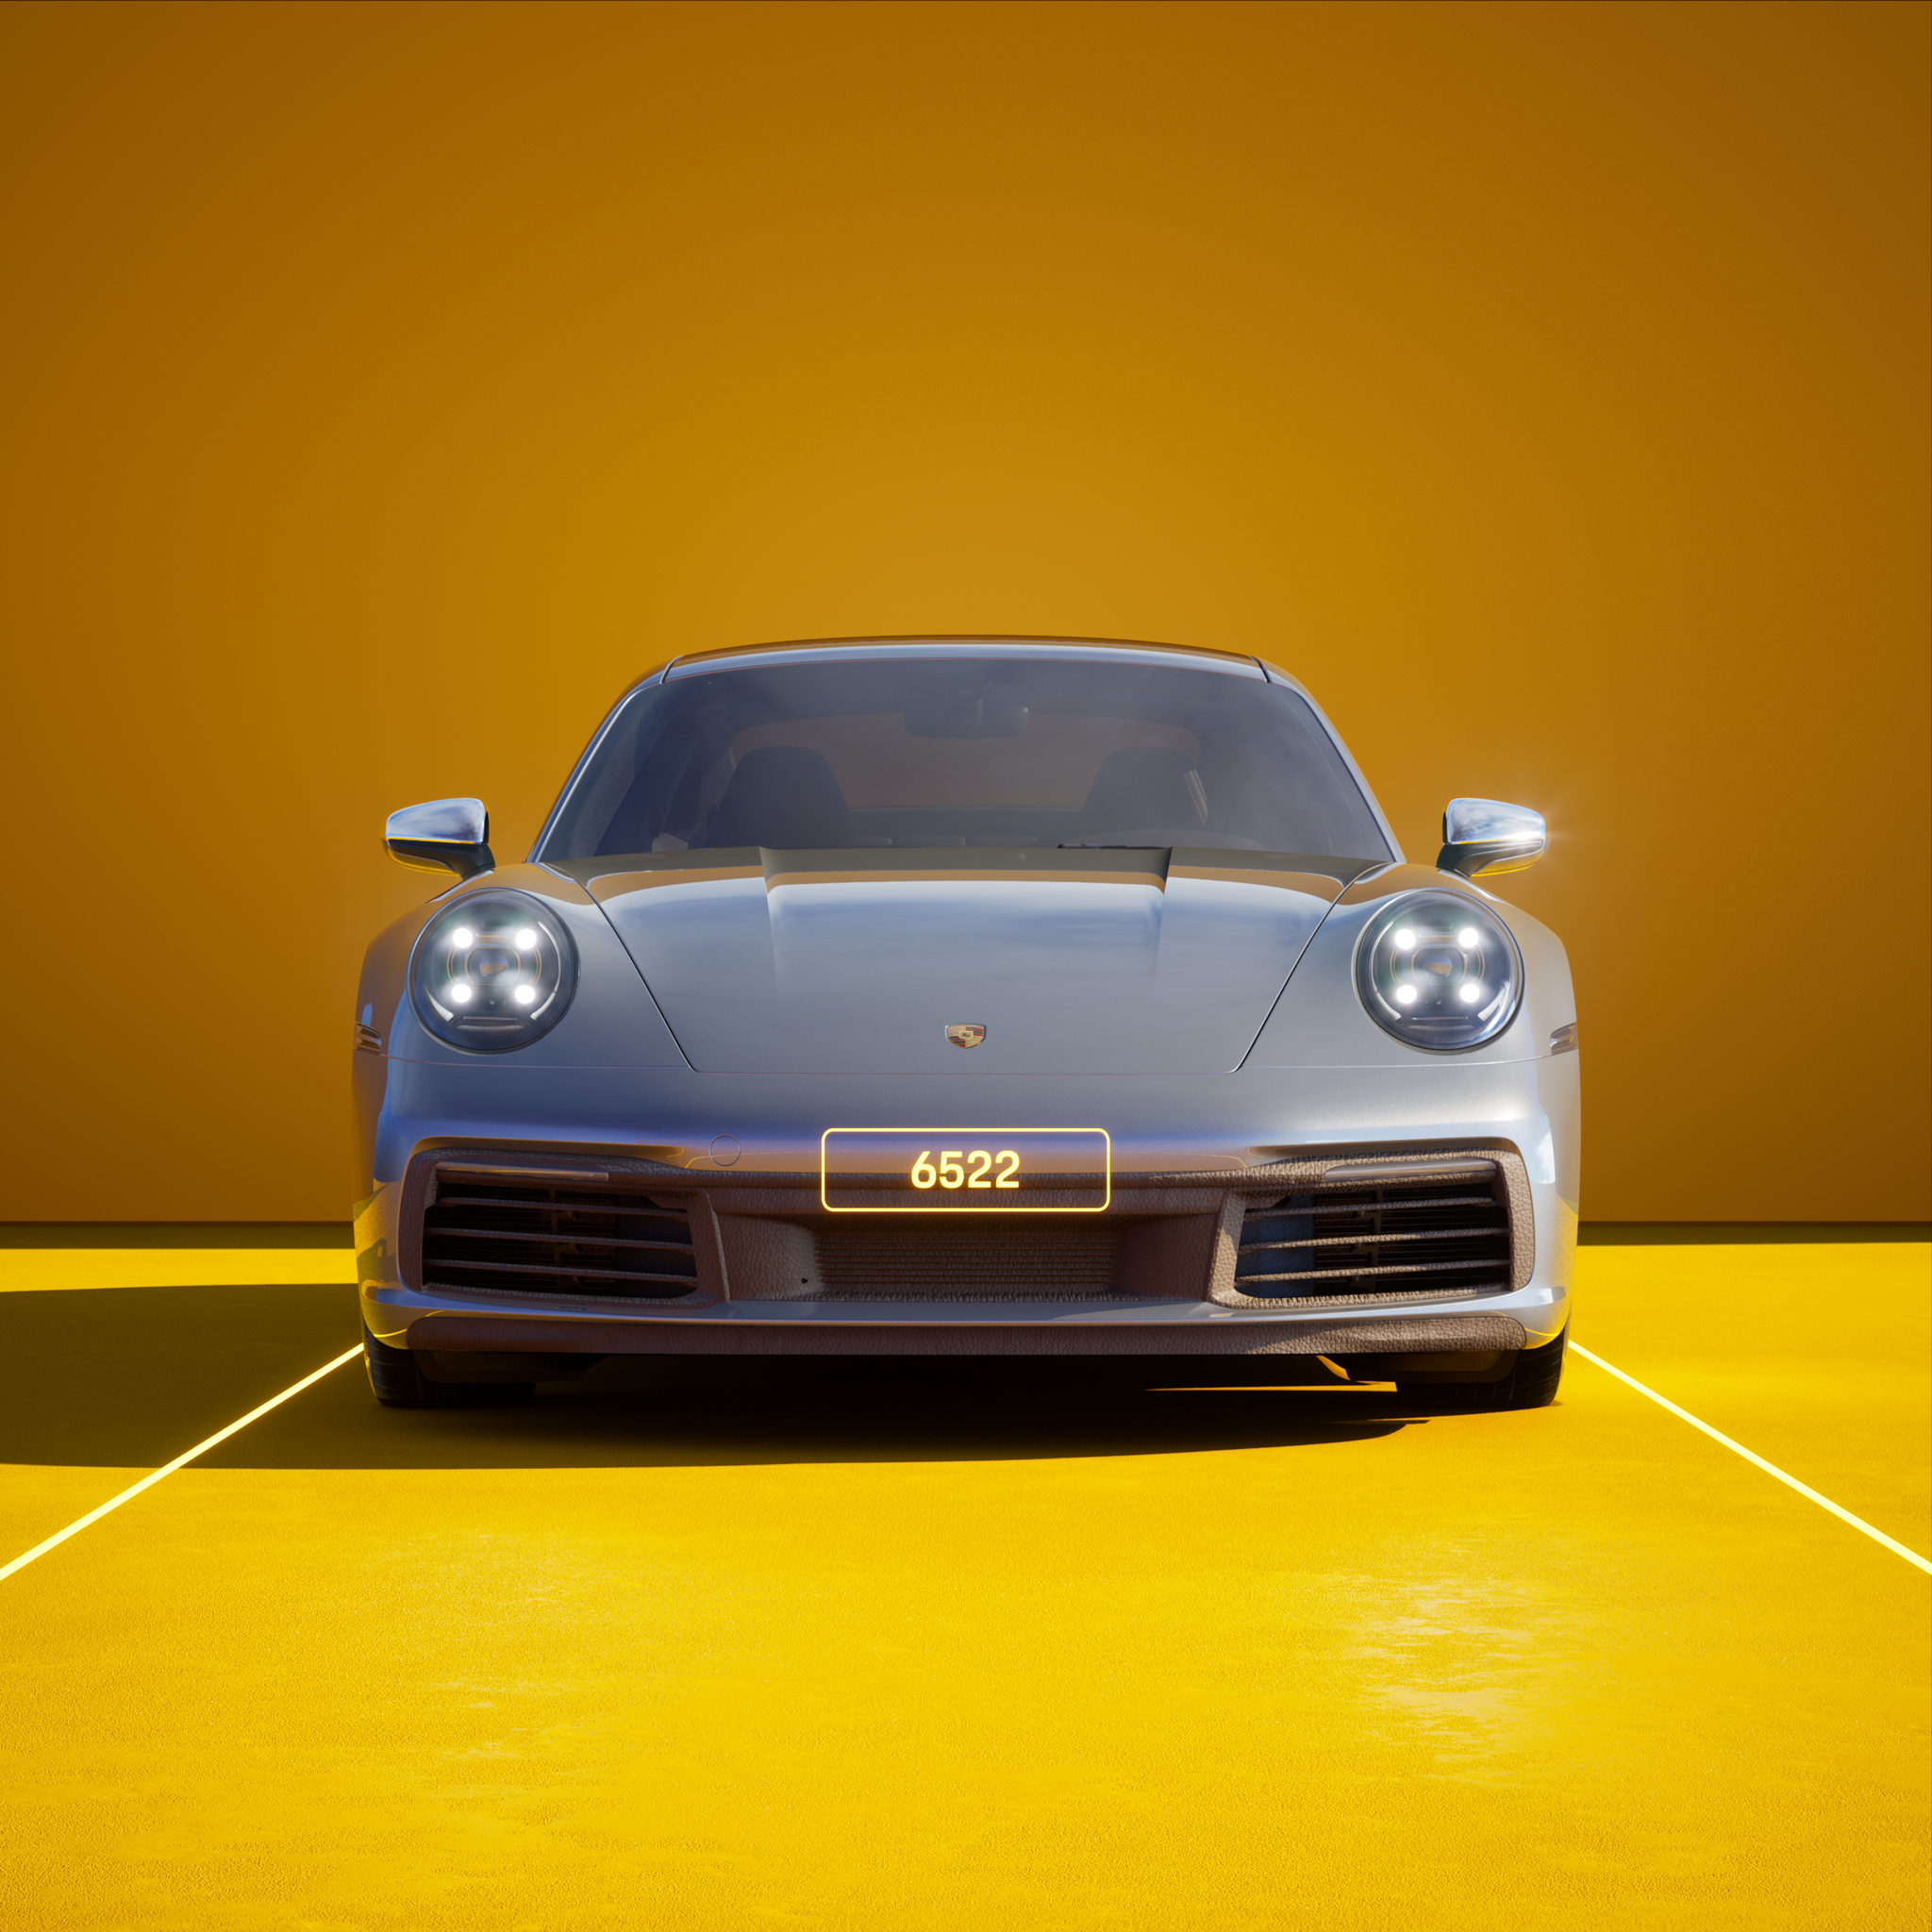 The PORSCHΞ 911 6522 image in phase